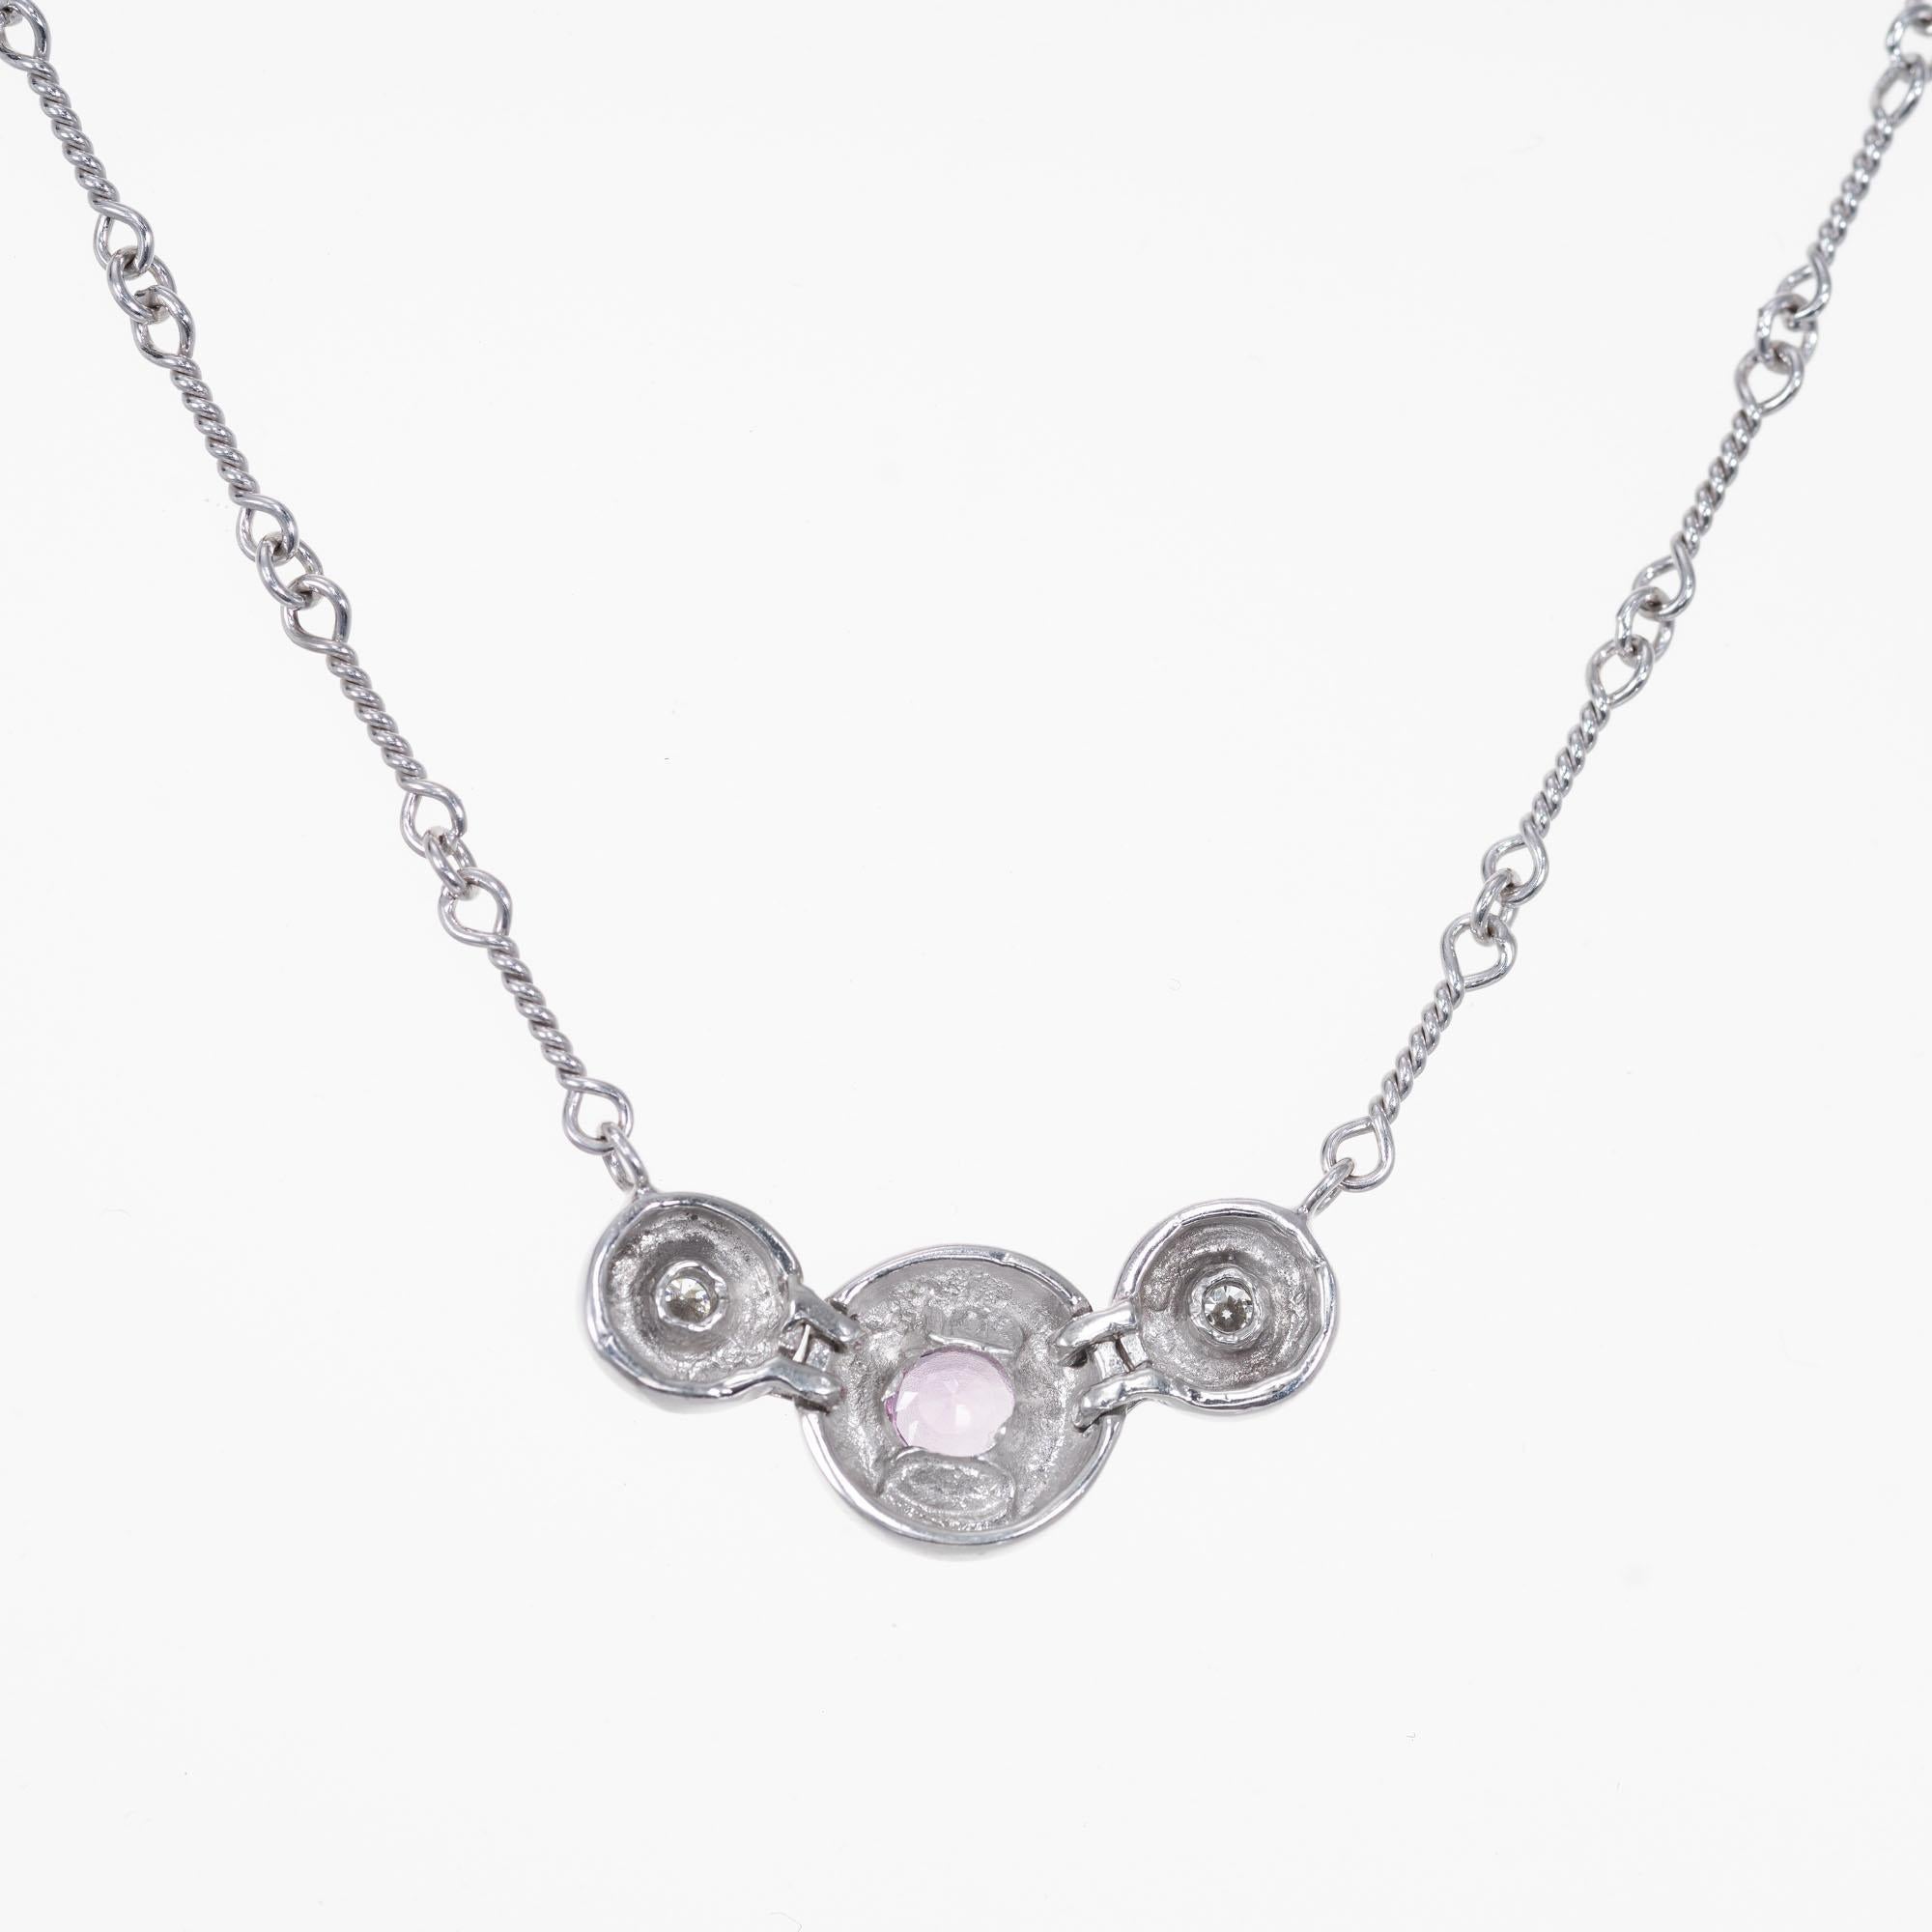 Pink sapphire and diamond pendant necklace. GIA certified pink round center stone set in 14k white gold with 2 round brilliant cut side diamonds. Wire bar link chain 15.5 inches. 

1 pink sapphire, approx. total weight .35cts, VS, 4.0mm, natural